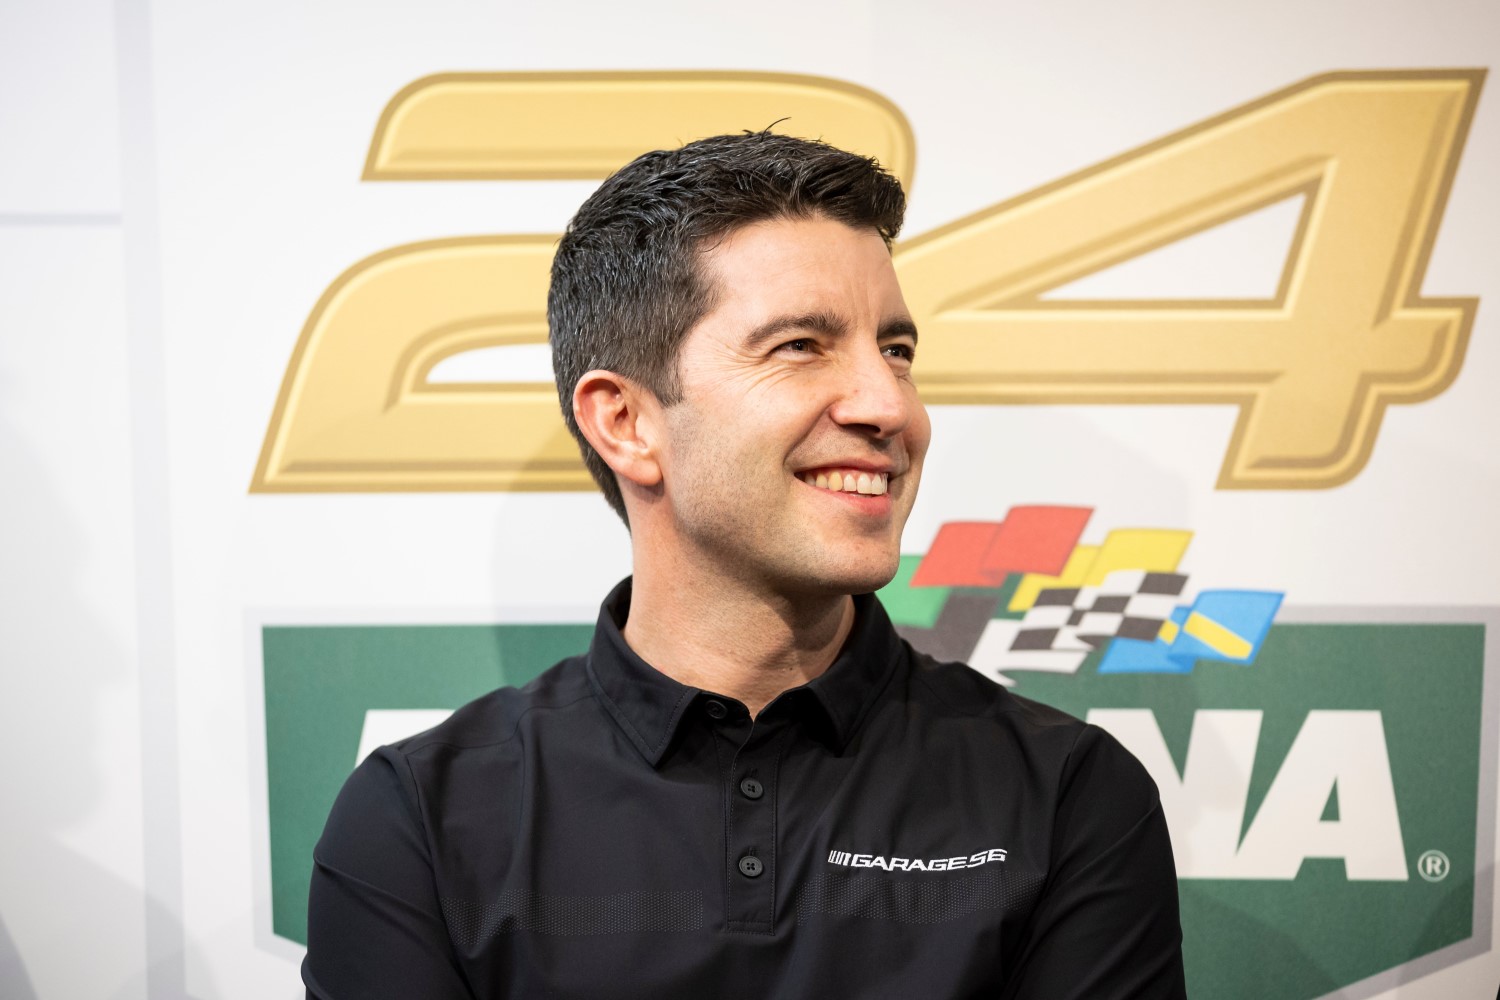 Mike Rockenfeller looks on during a press conference announcing the NASCAR Garage 56 driver lineup for entry in 2023 Le mans before the Rolex 24 at Daytona International Speedway on January 28, 2023 in Daytona Beach, Florida. (Photo by James Gilbert/Getty Images)